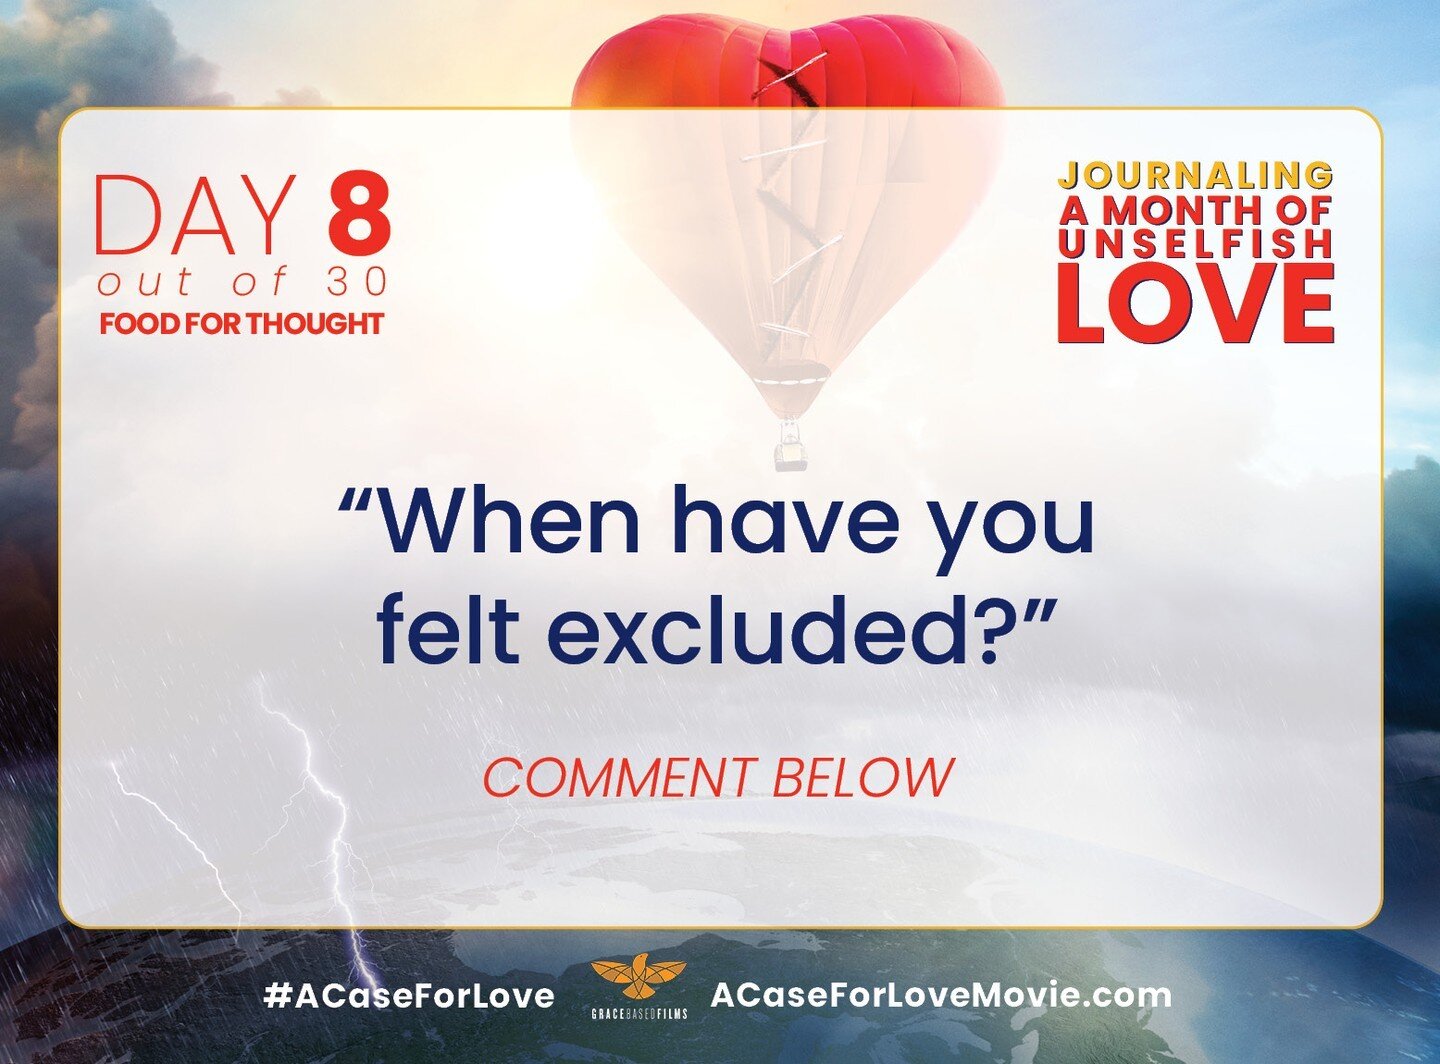 DAY 8 of 30--tell us what you think! How's the journaling going? See today's prompt to get those comment juices flowing and let us know how acts unselfish love are evident in your experience today: whether acts you witness, experience, or perform! Ne